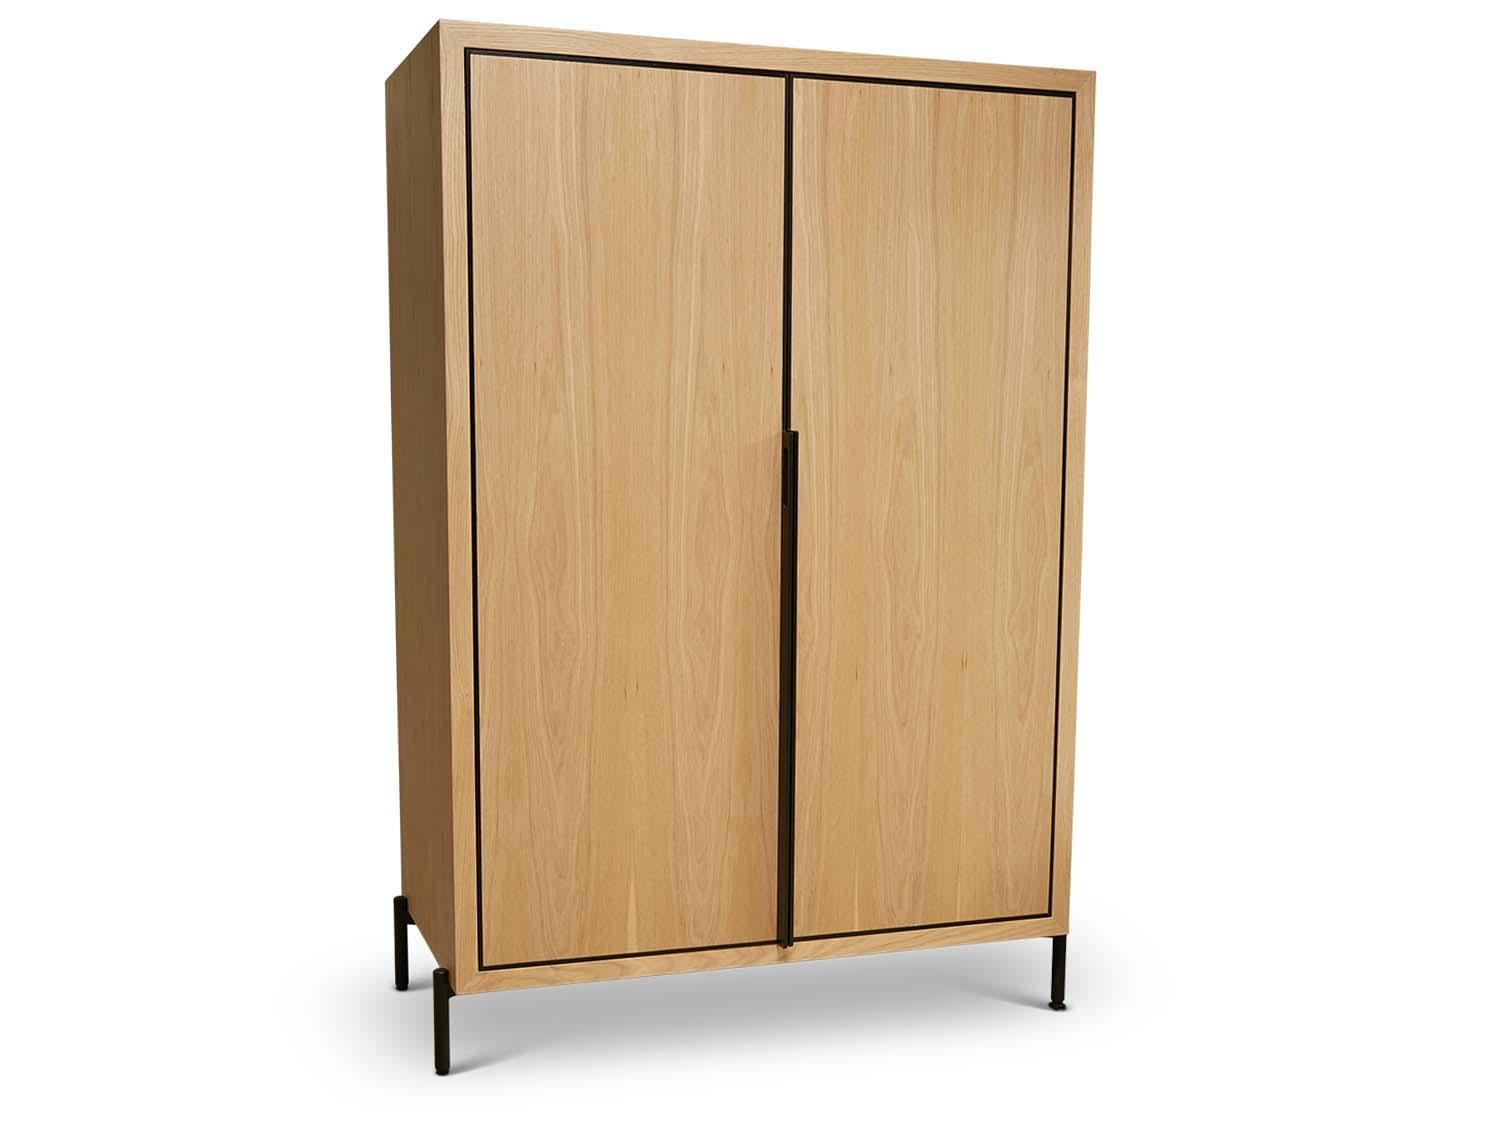 The Balboa Tall Cabinet features two doors wrapped in a brass band which extrude out to become an elegant hand tooled brass pull. The case is available in American walnut or white oak and rests above a tubular steel base. The interior has six